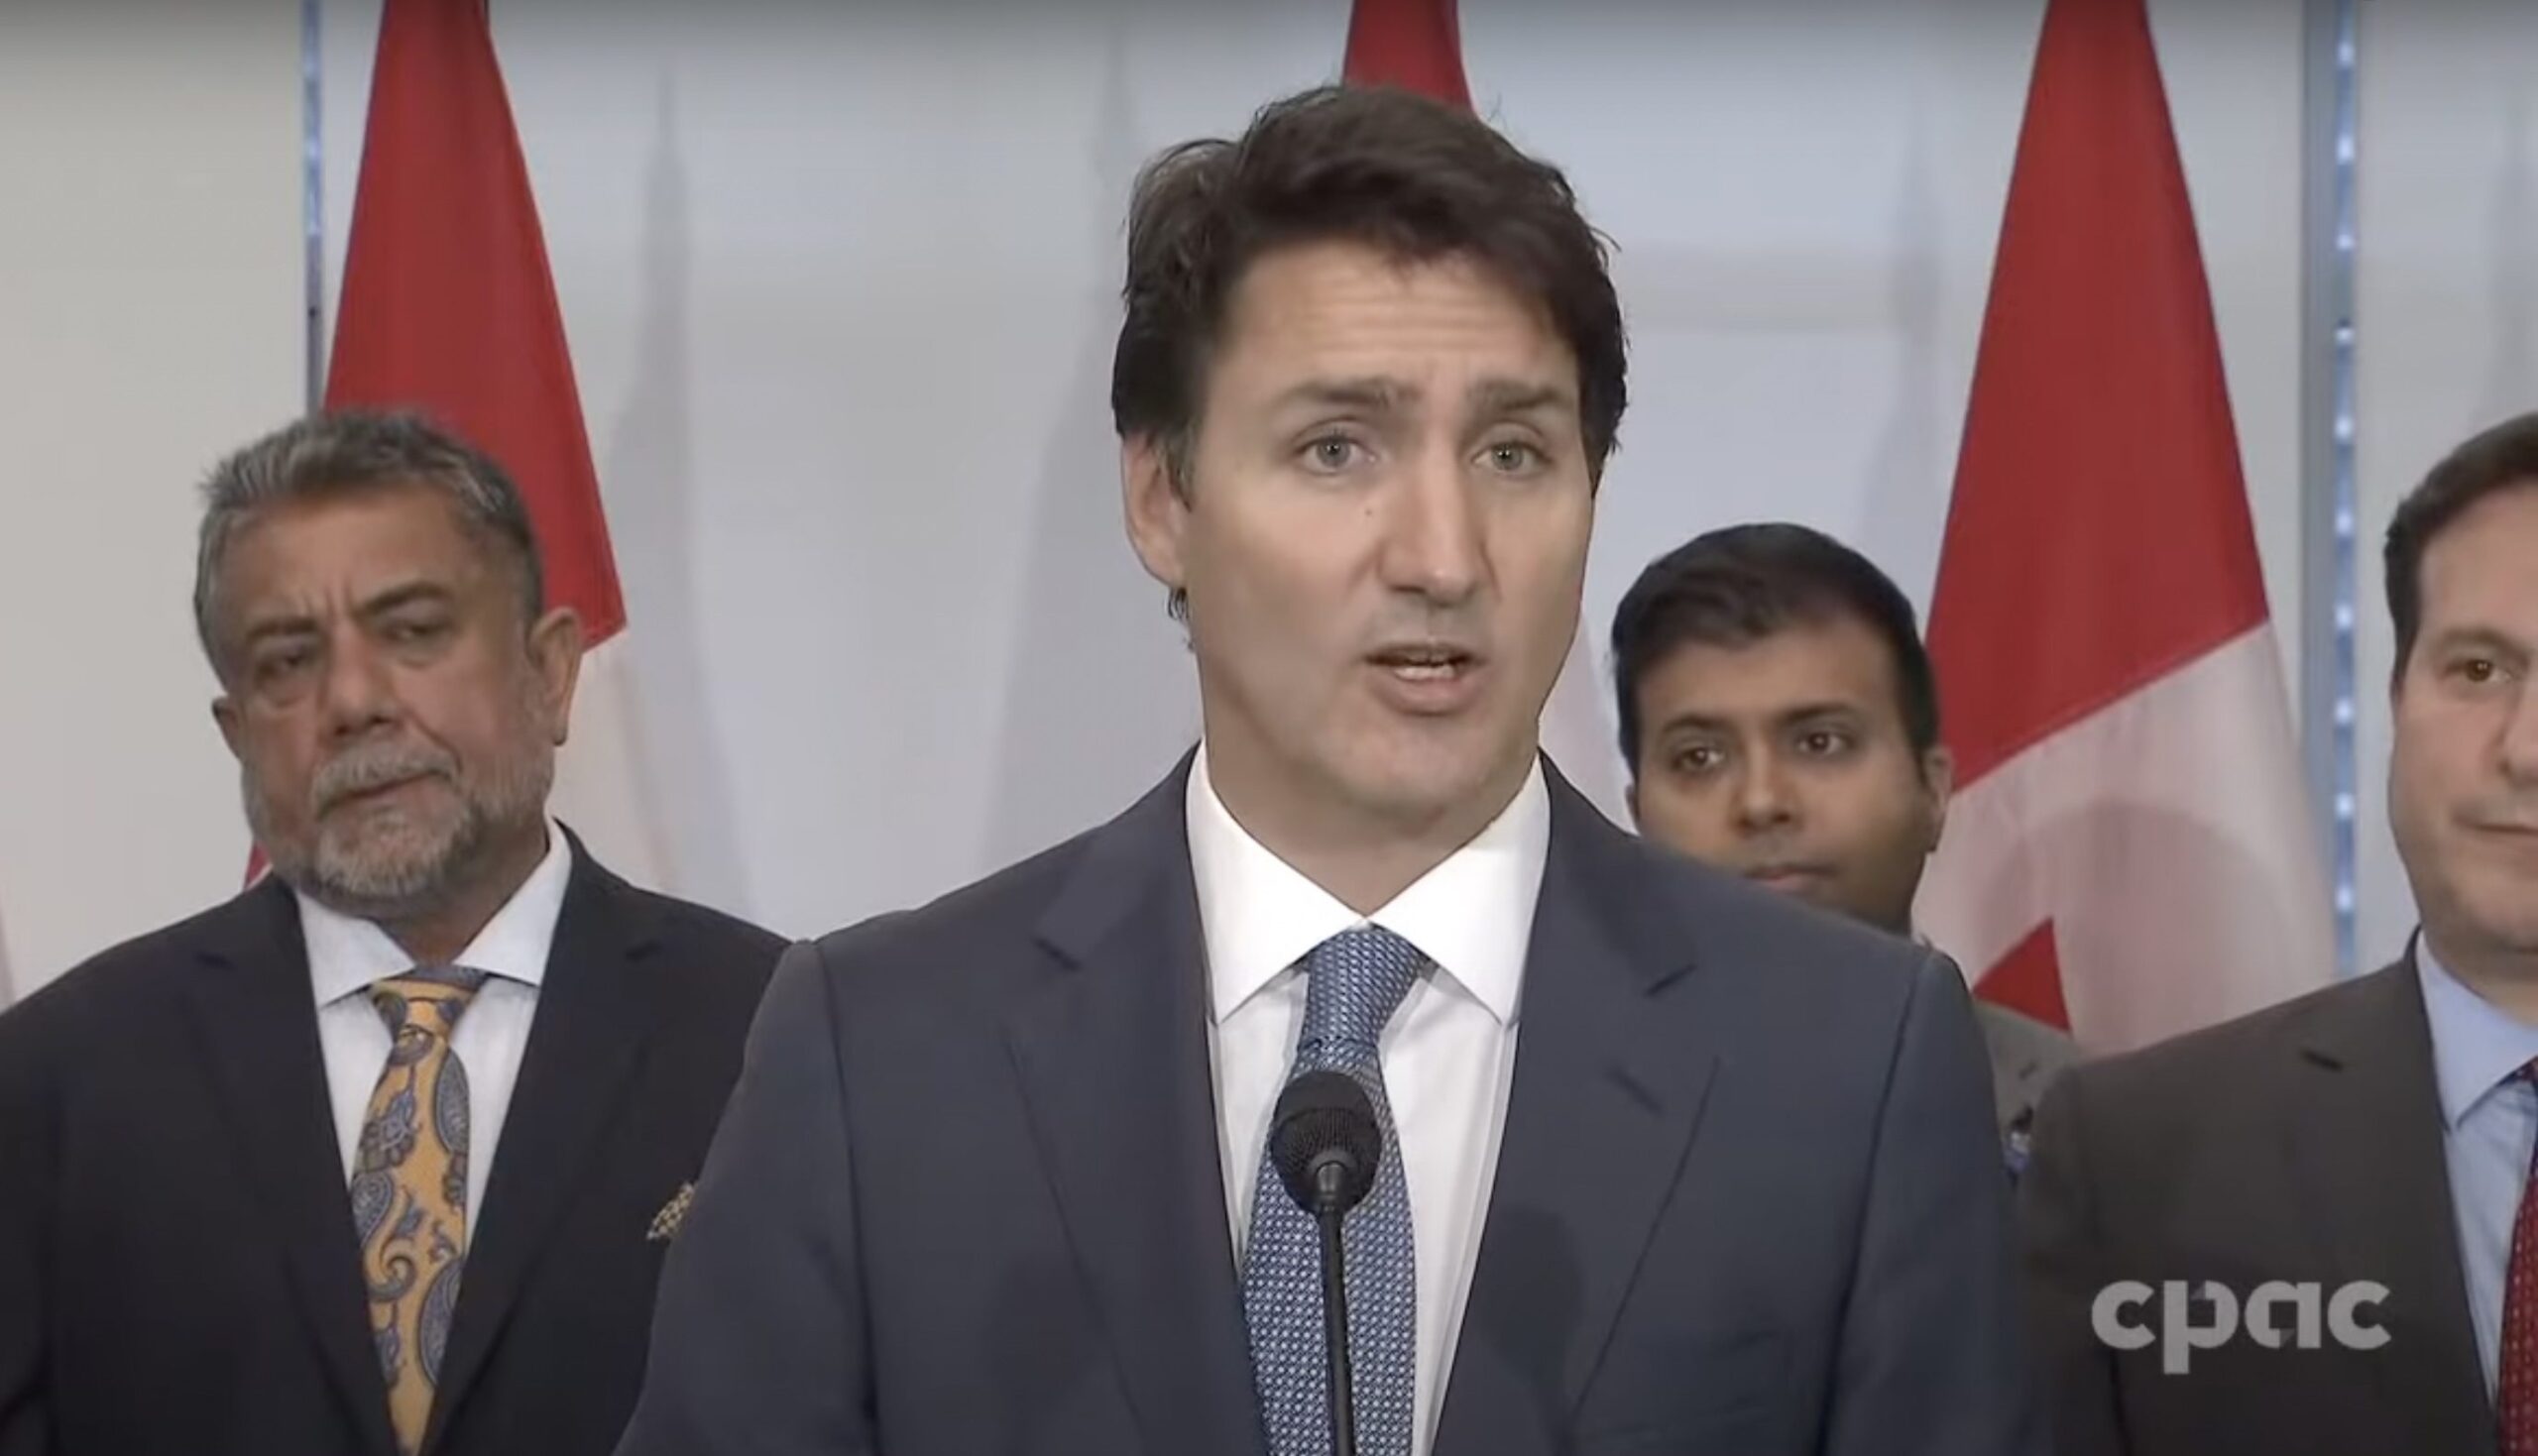 Justin Trudeau Suggests Muslims Are Only Objecting to LGBT Content in Schools Because of Misinformation From the ‘American Right Wing’ (VIDEO)